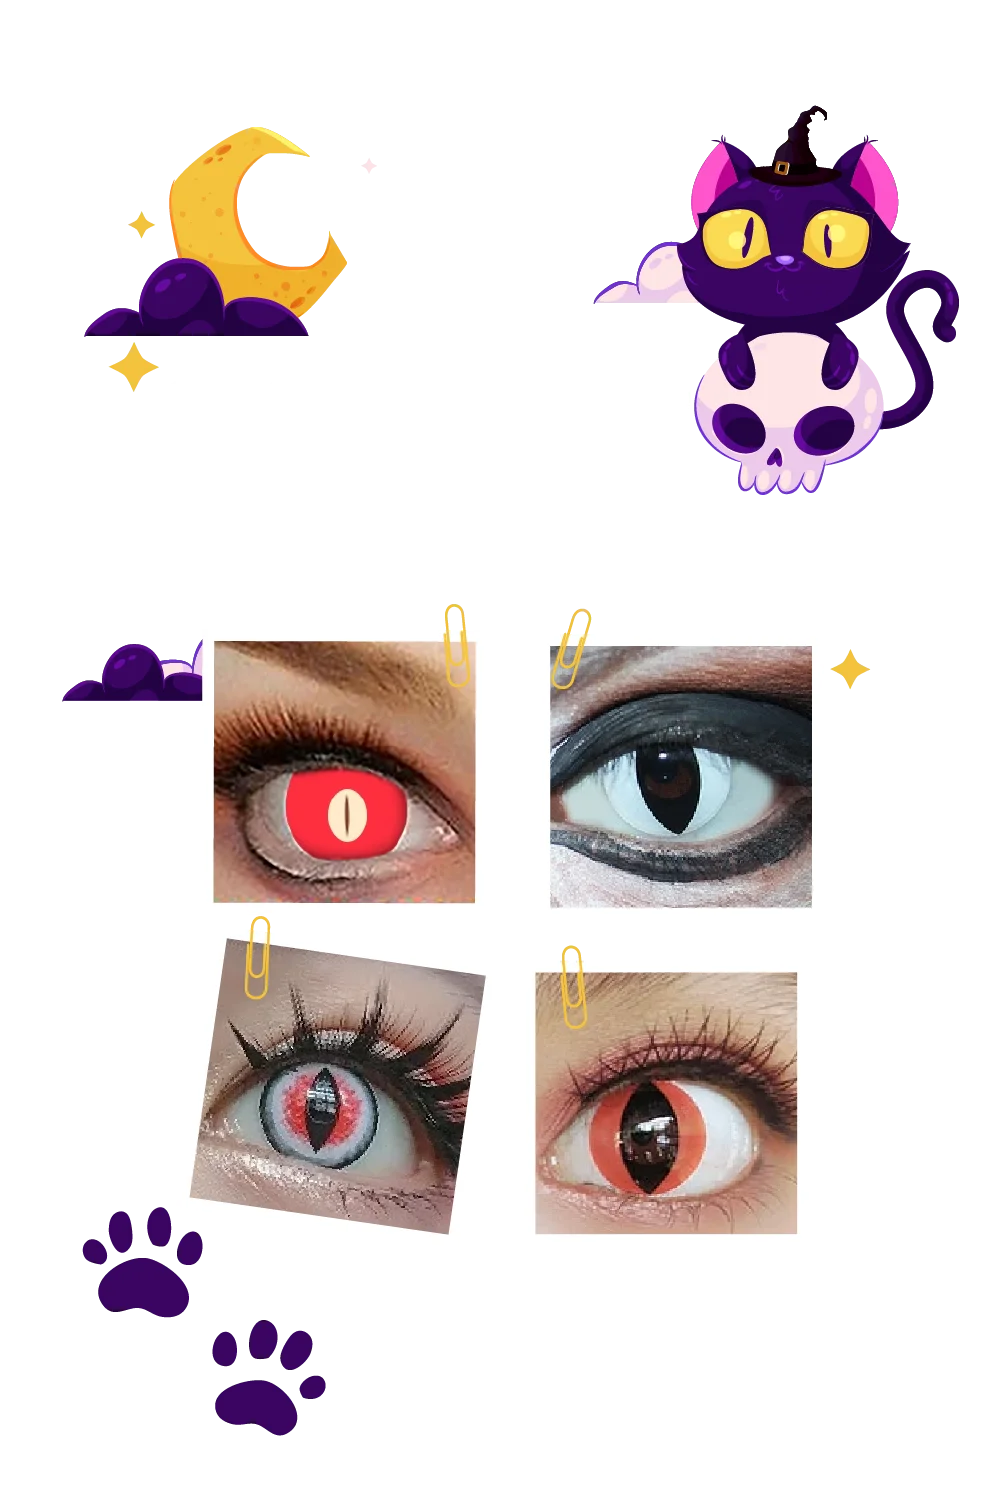 49 Top Images Cat Eye Contacts Cheap - Caturday The Ulimate Cat Lady Accessory Cat Eye Contacts Beaumiroir